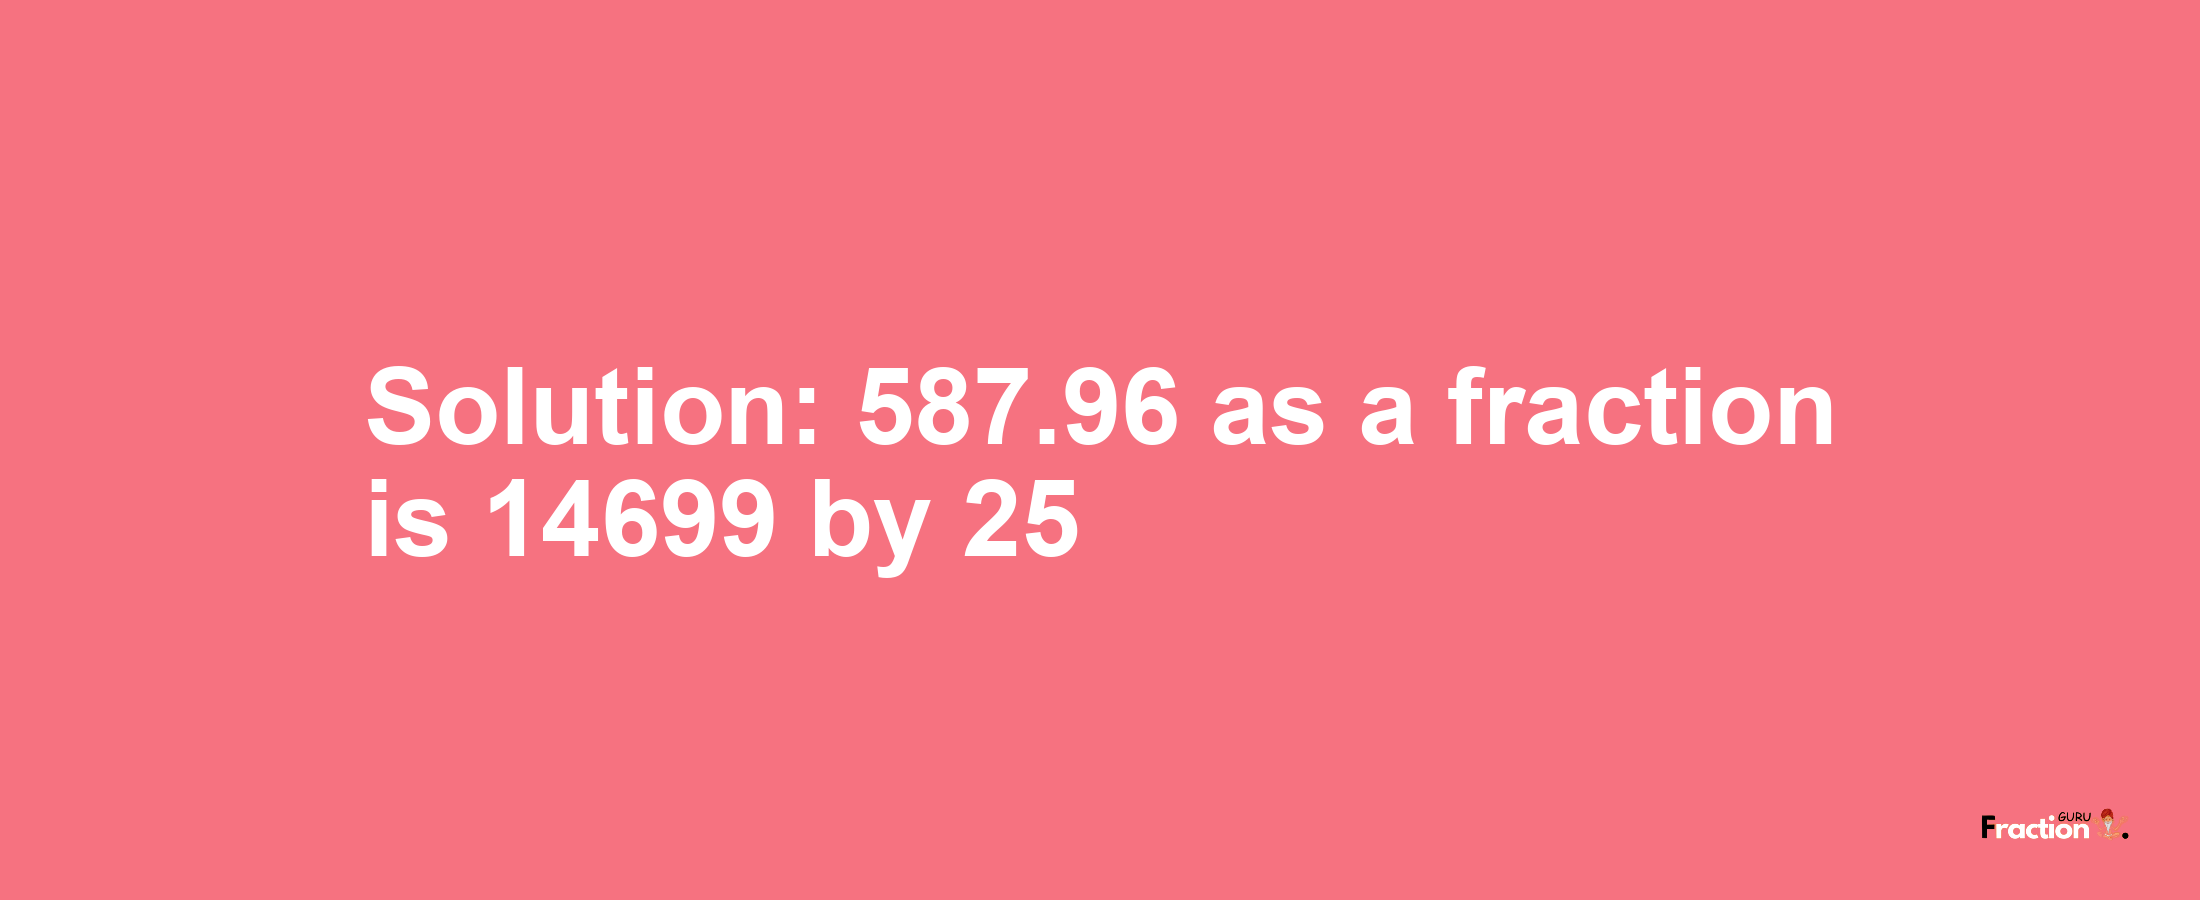 Solution:587.96 as a fraction is 14699/25